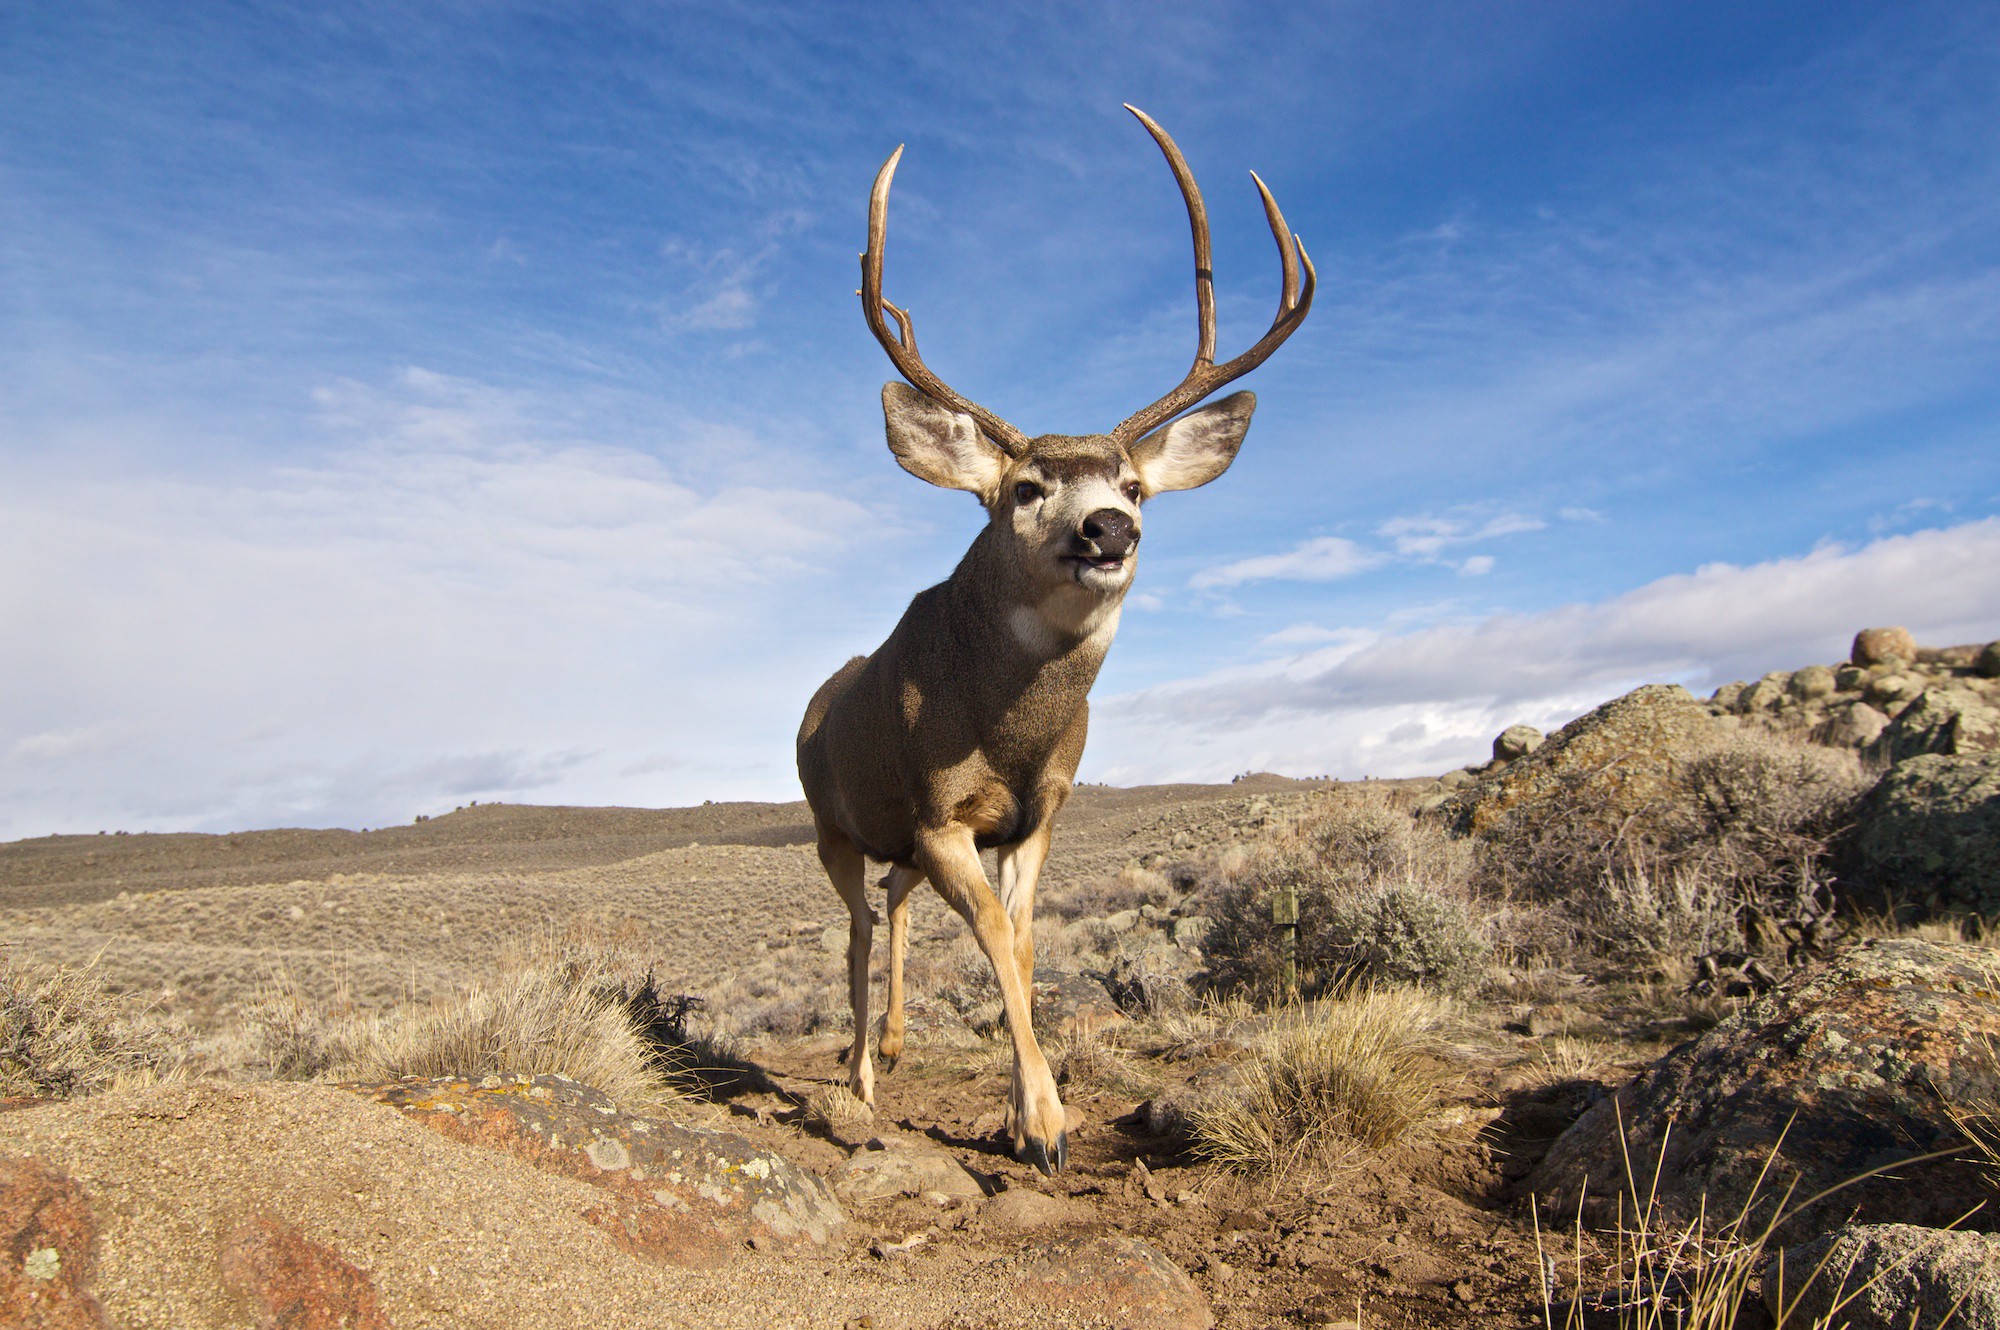 Mule deer are well adapted to the arid West and are named for their large mule-like ears (Photo: Joe Riis.)